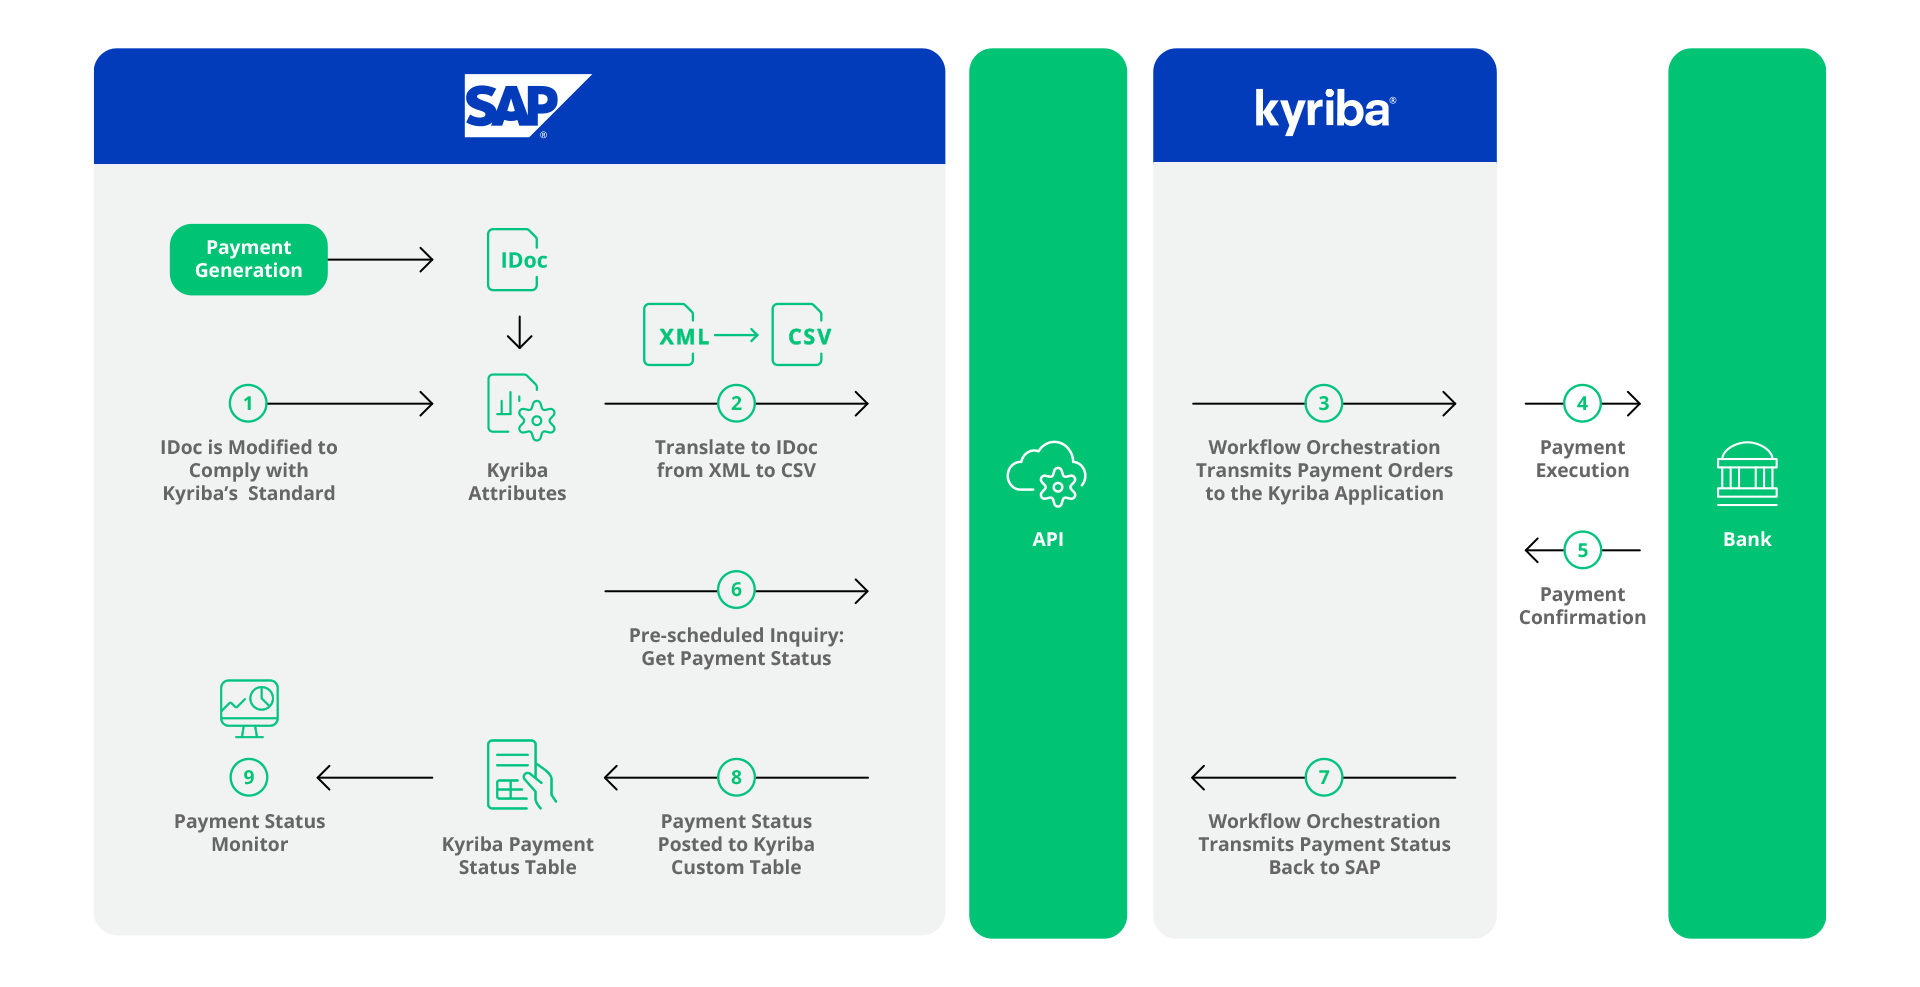 SAP-Kyriba Integrated Architecture Payments–CPI Model